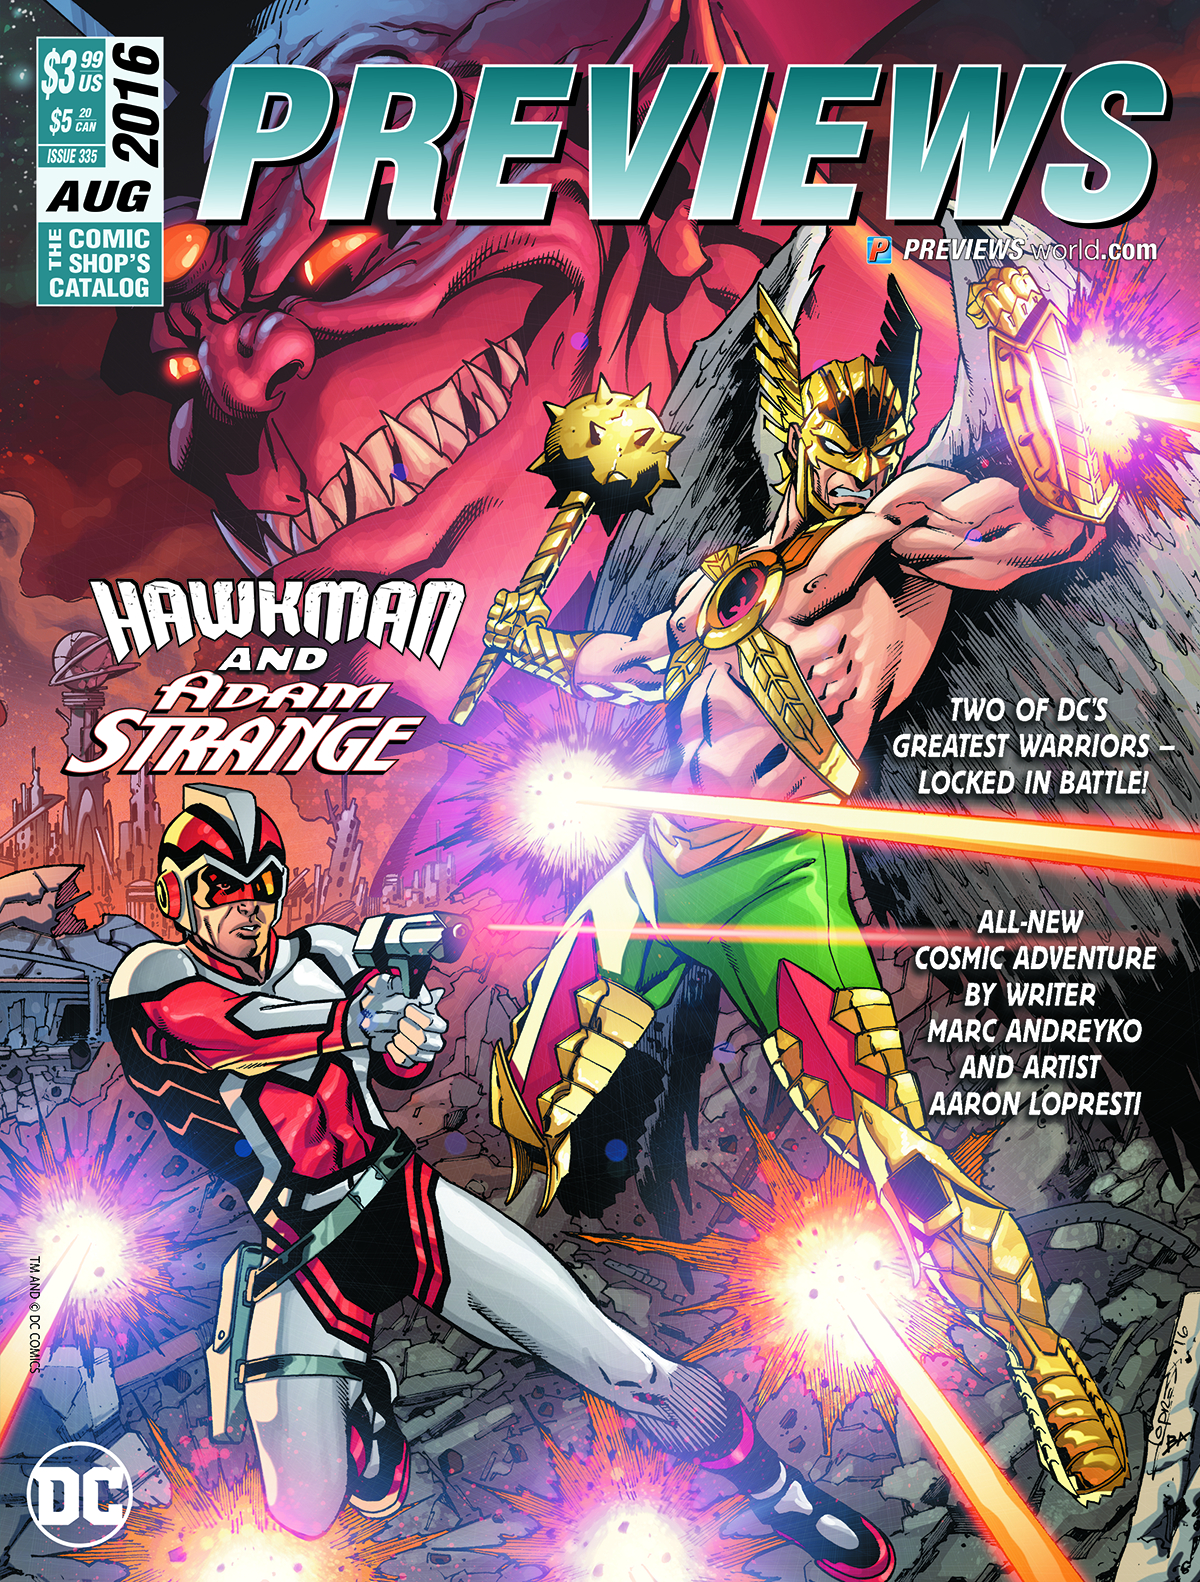 PREVIEWS #335 AUGUST 2016